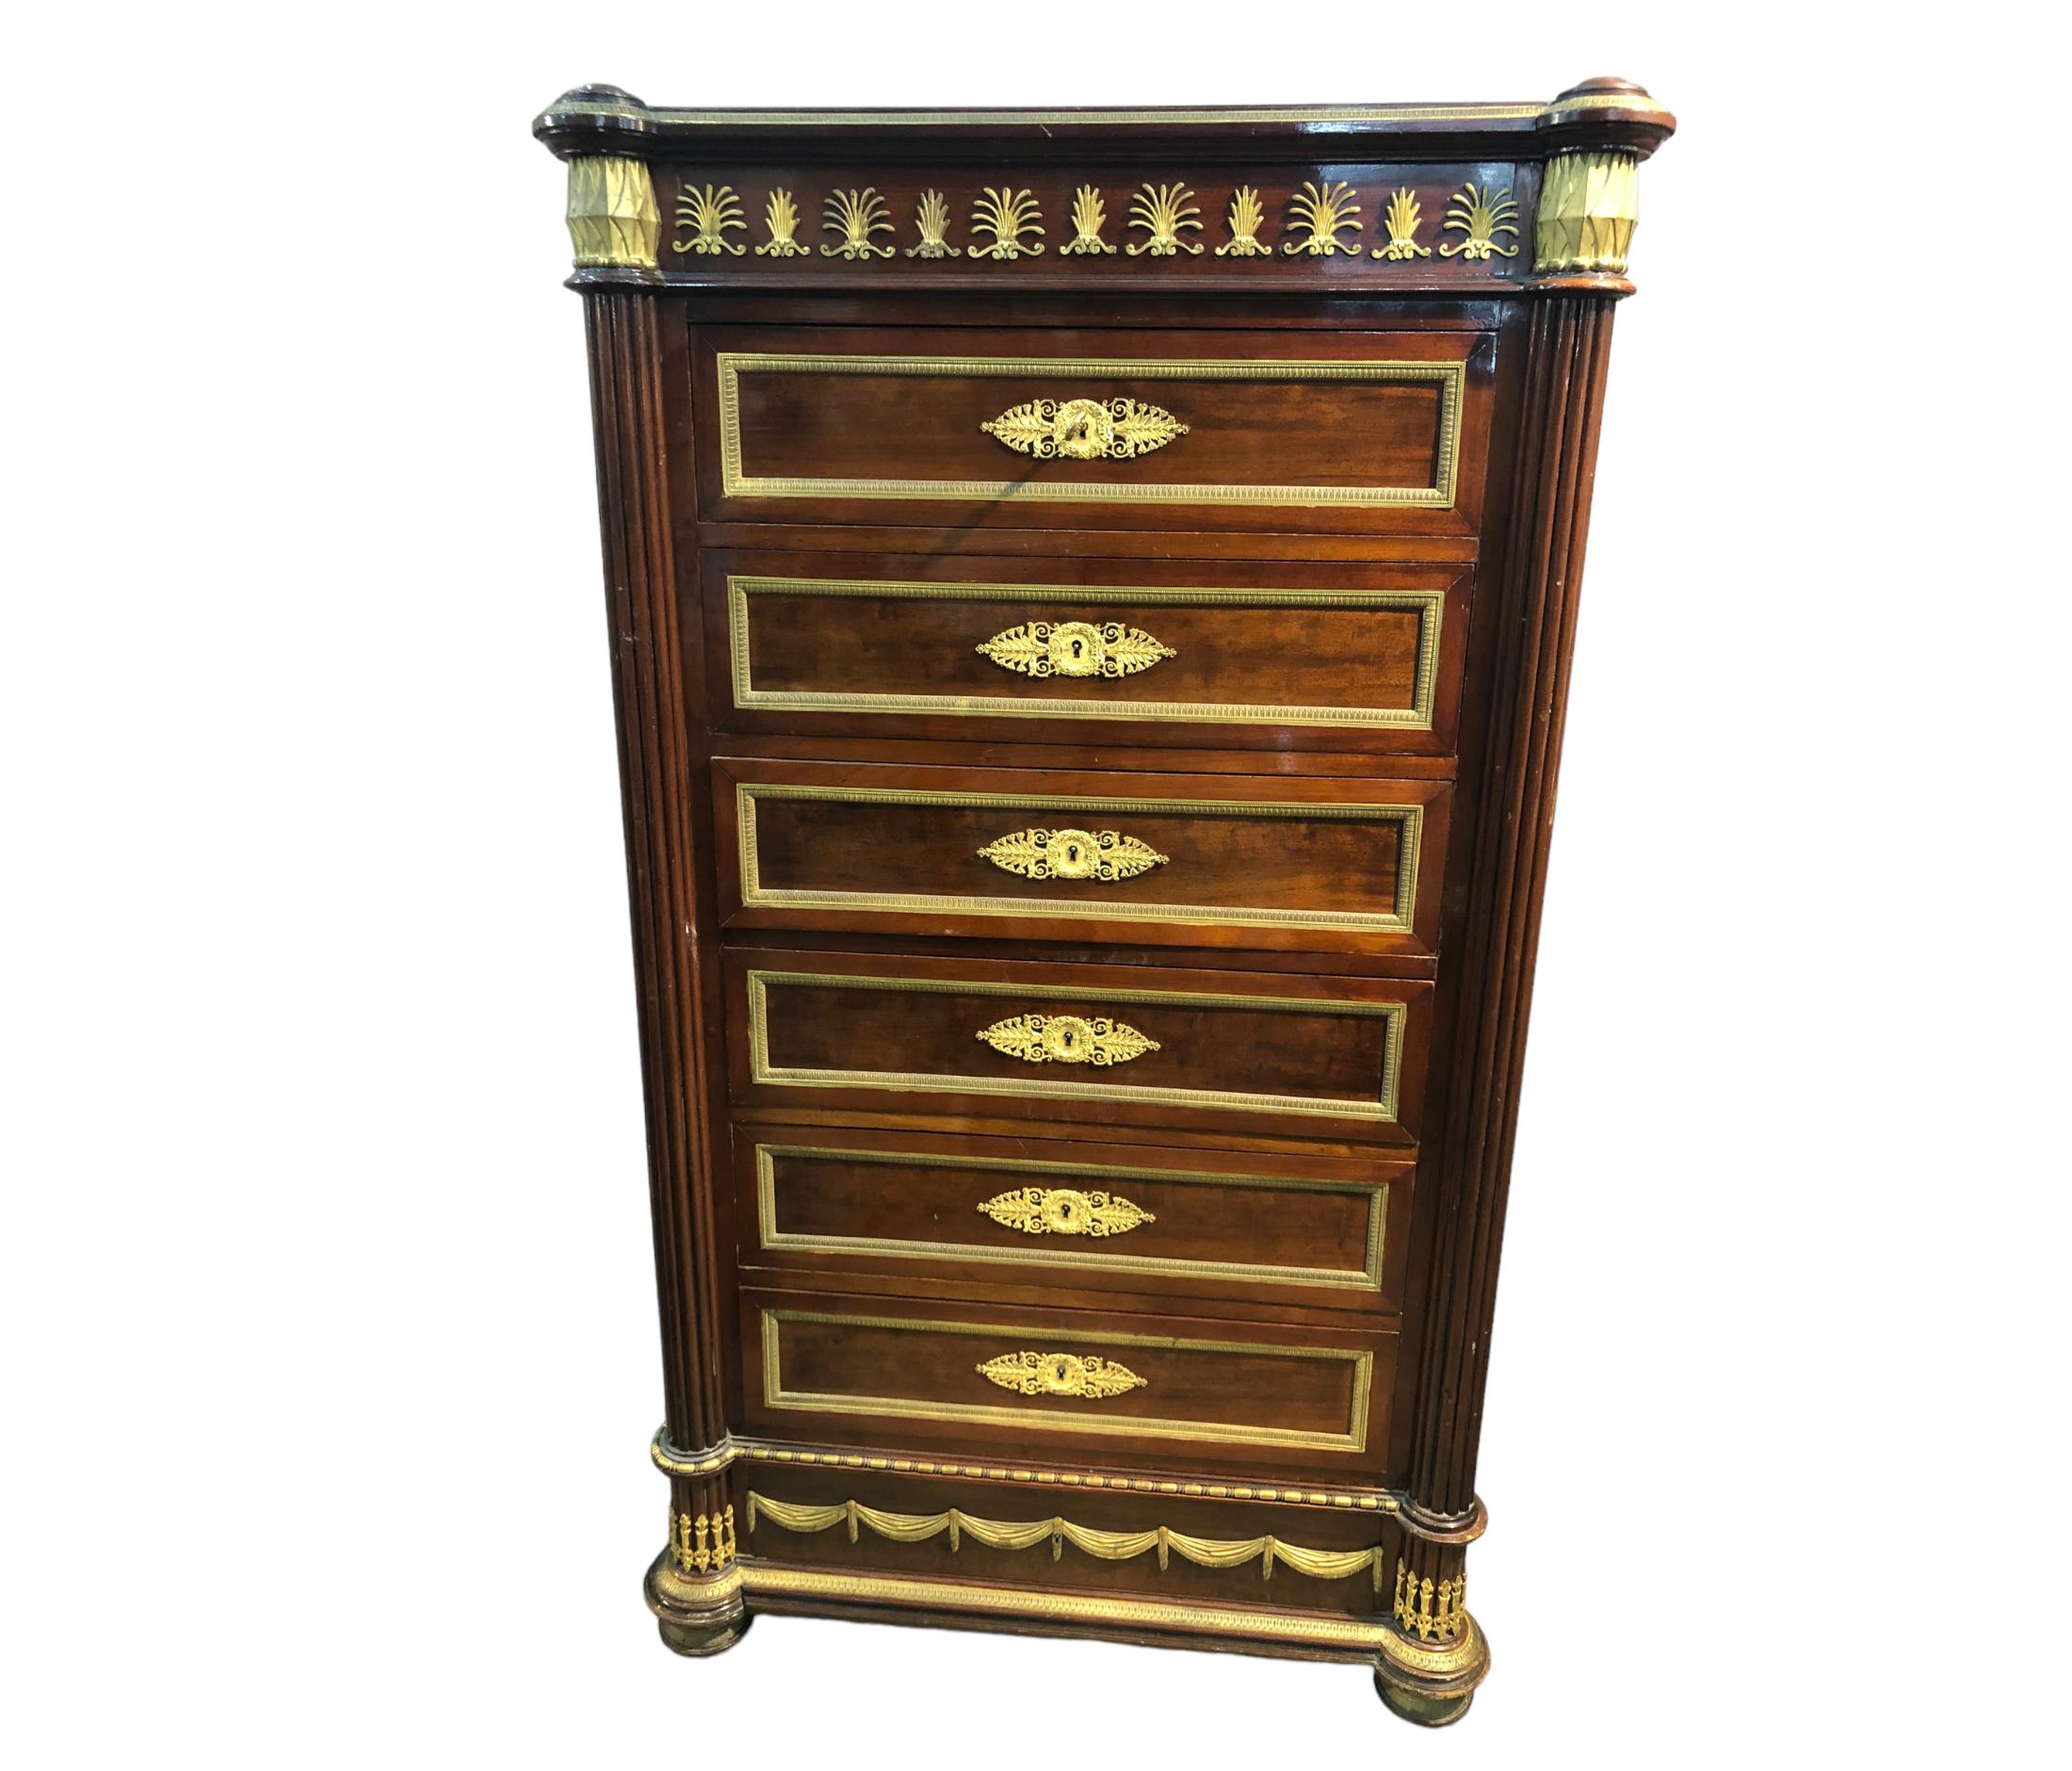 19th C. French Empire Style Ormolu Mounted Semainier Tall Chest For Sale 7